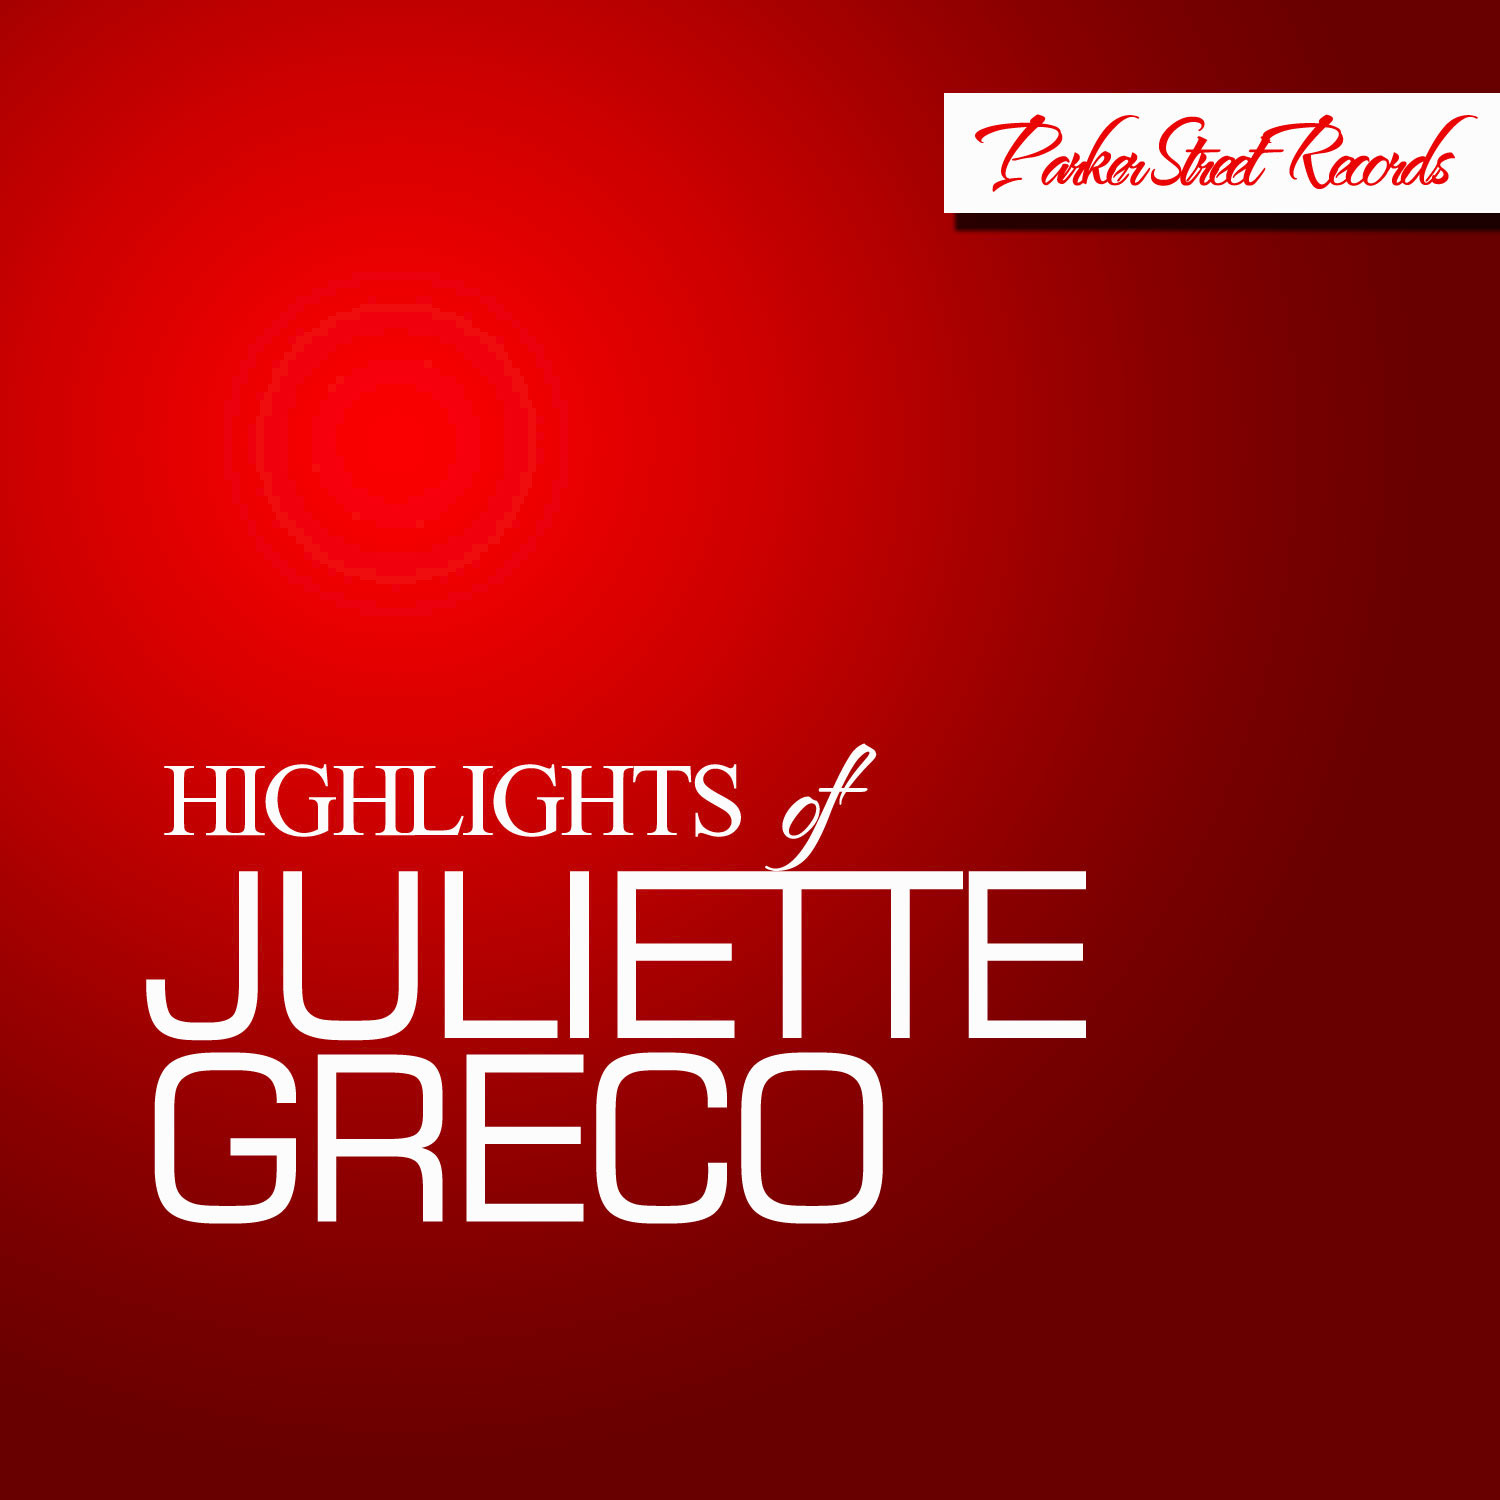 Highlights of Juliette Greco